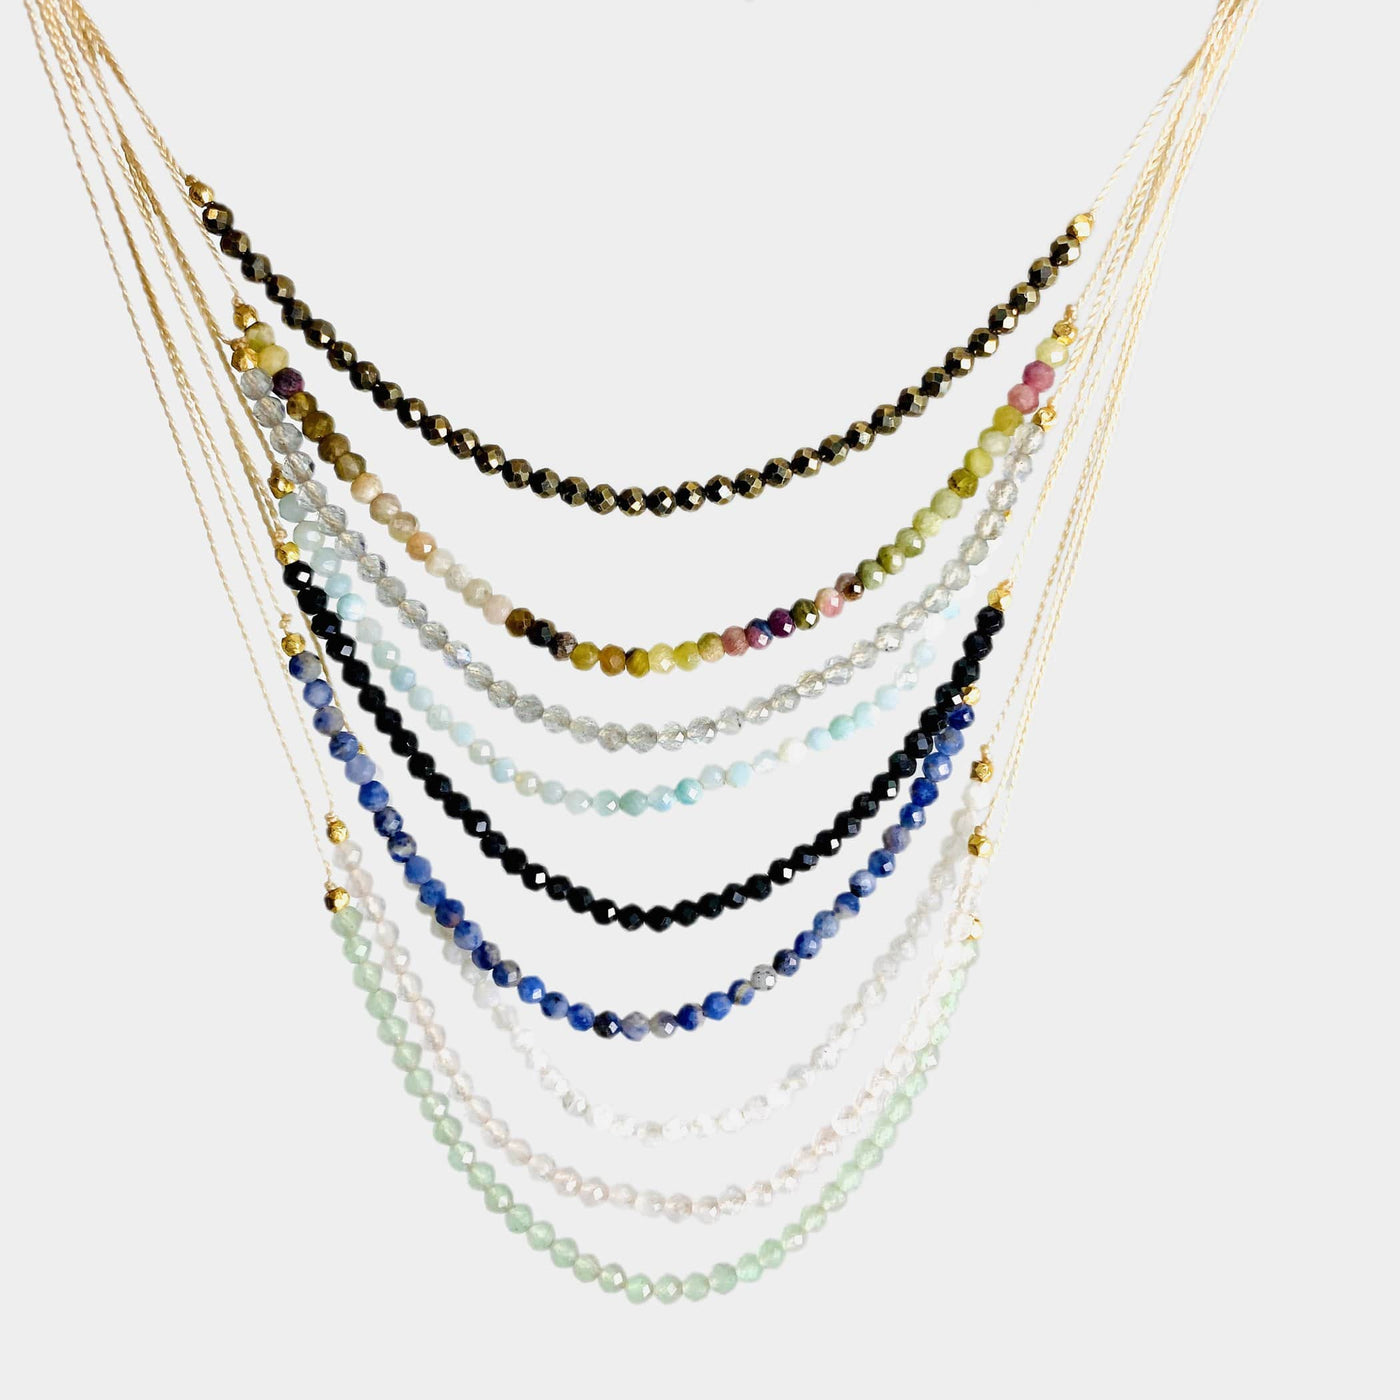 Gemstone Bead Finished Necklaces in different stones on a white background